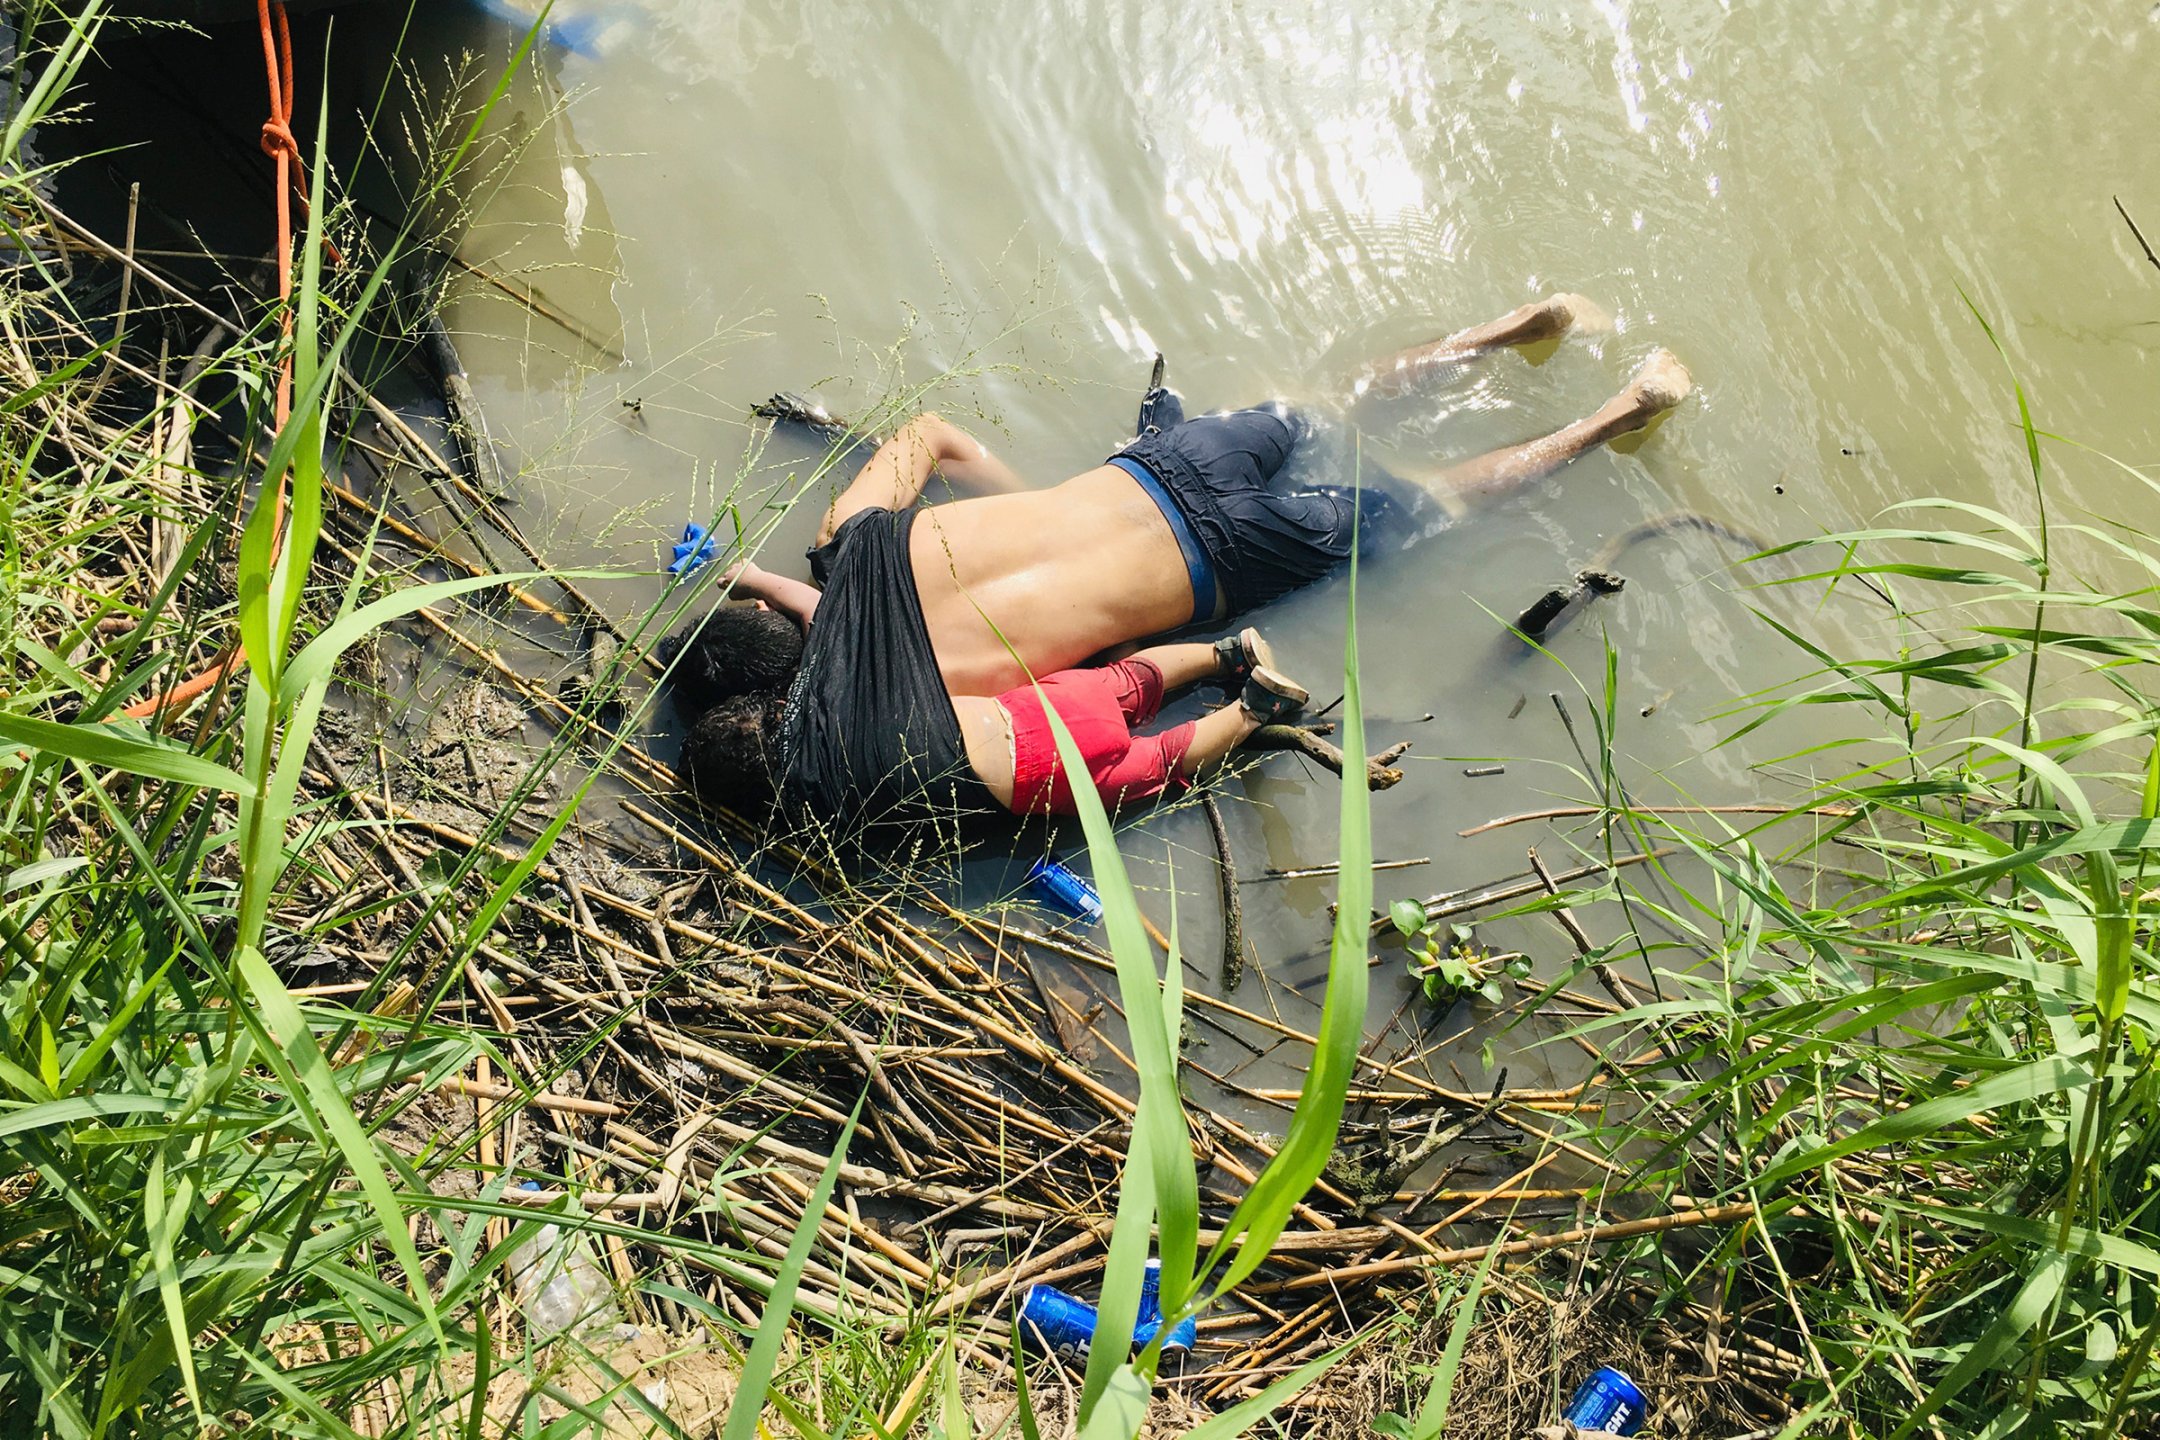 The bodies of Salvadoran migrant Óscar Alberto Martínez Ramírez and his nearly 2-year-old daughter Valeria lying on the banks of the Rio Grande in Matamoros, Mexico, after they drowned trying to cross the river to Brownsville, Texas, on June 24.